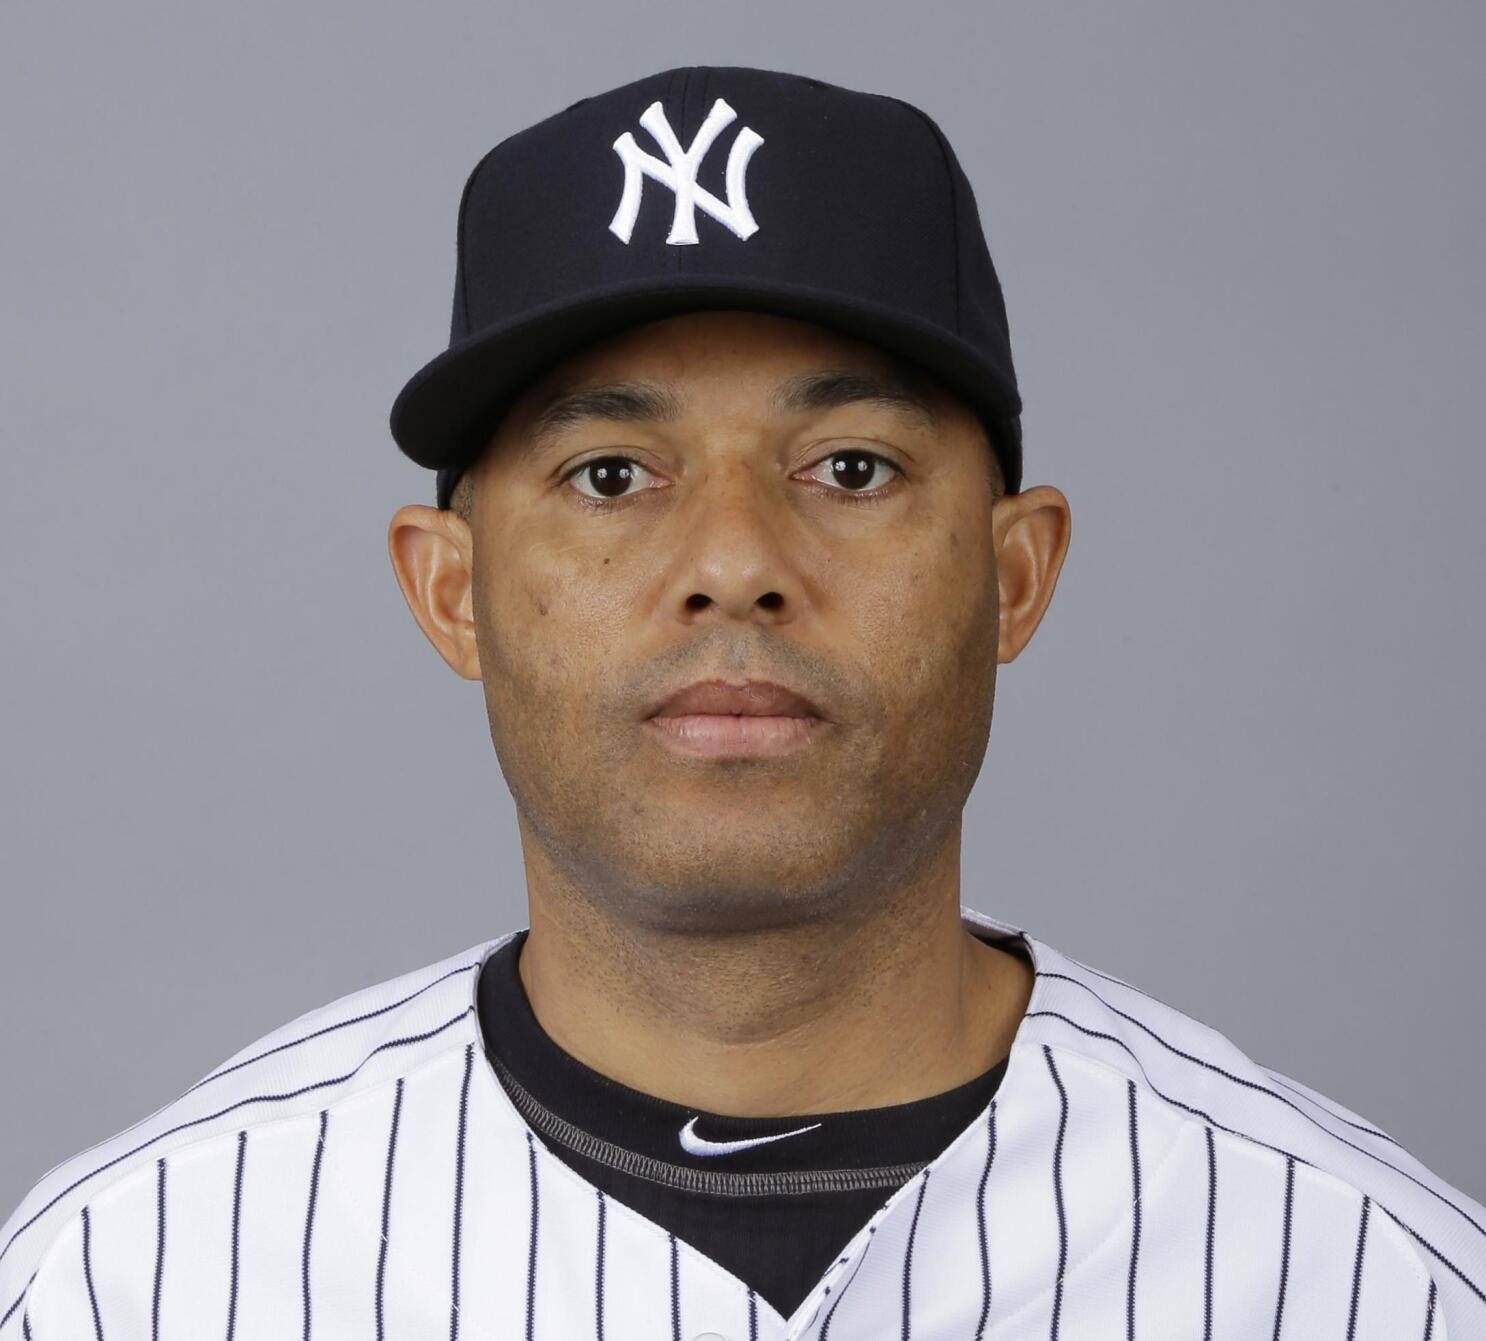 Yankees to dedicate plaque to Mariano Rivera on Aug 14